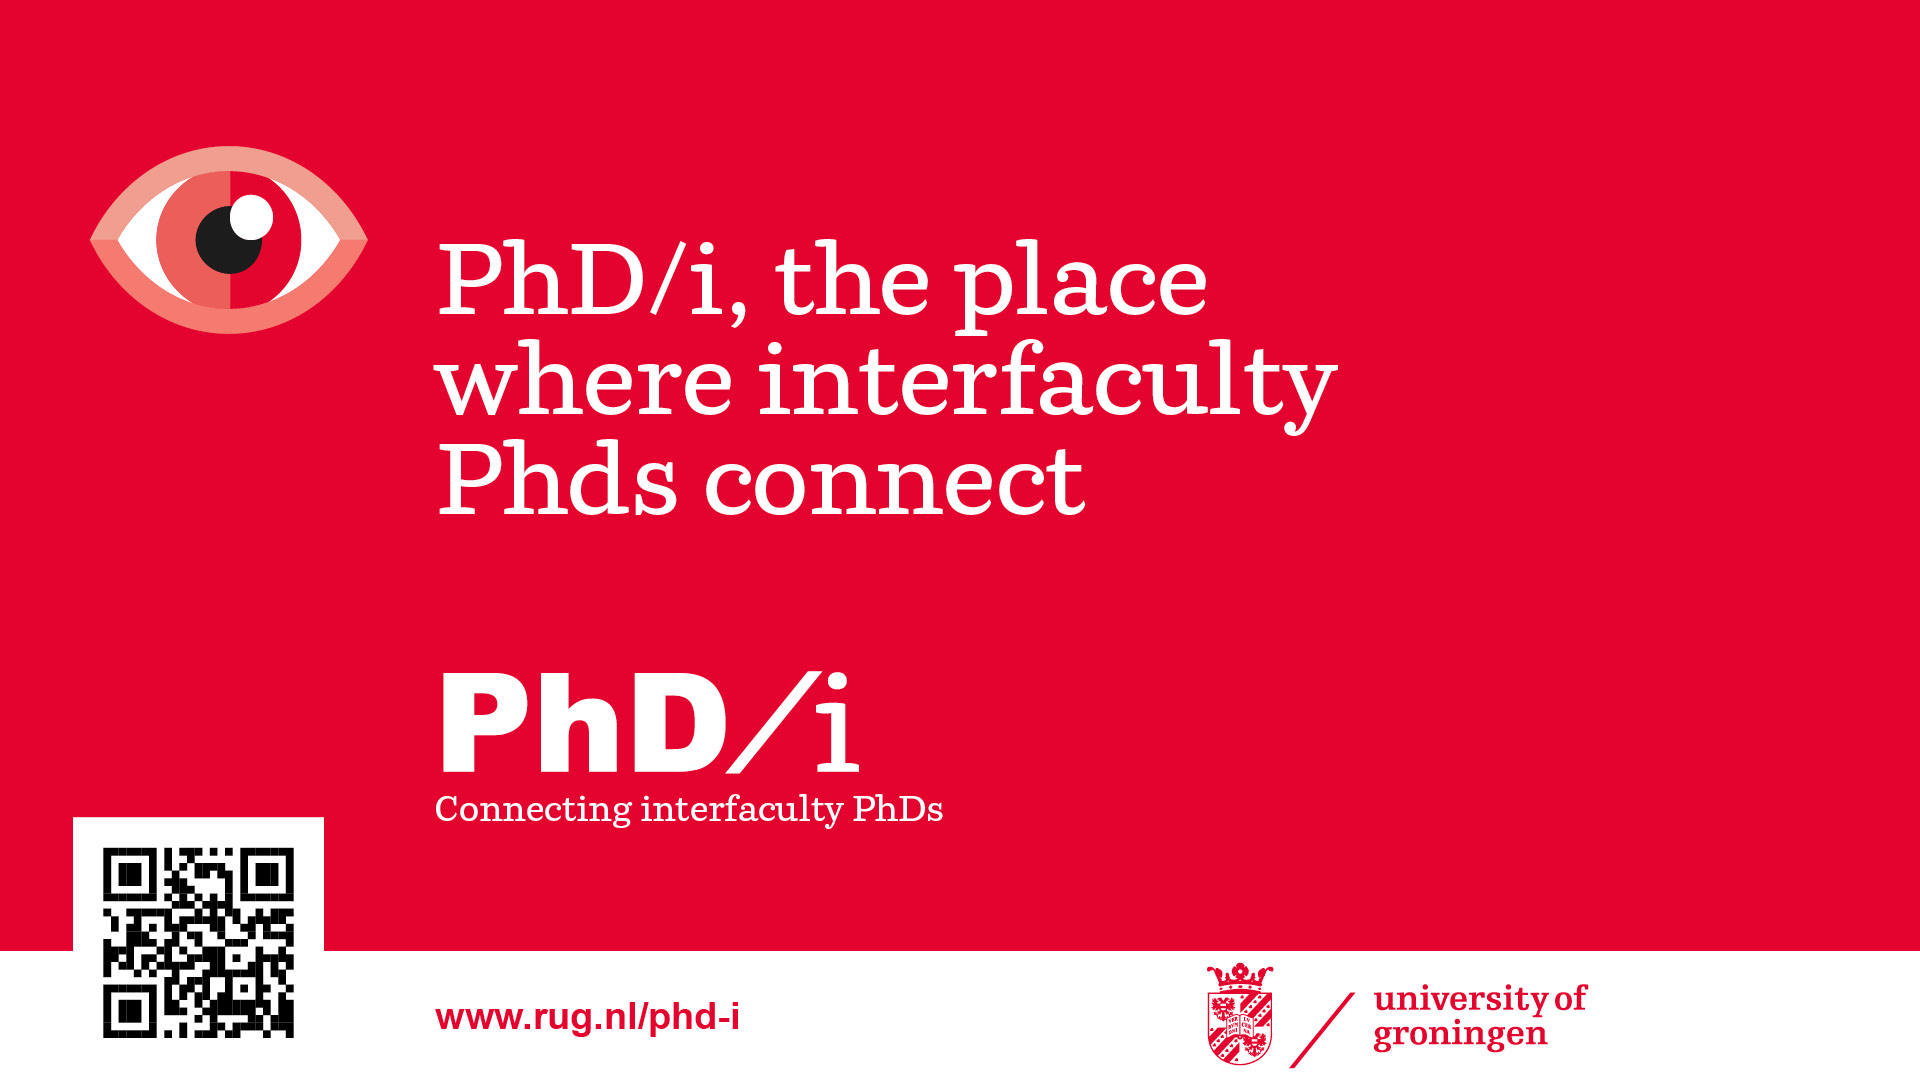 PhD/i - learning community for interfaculty PhD's